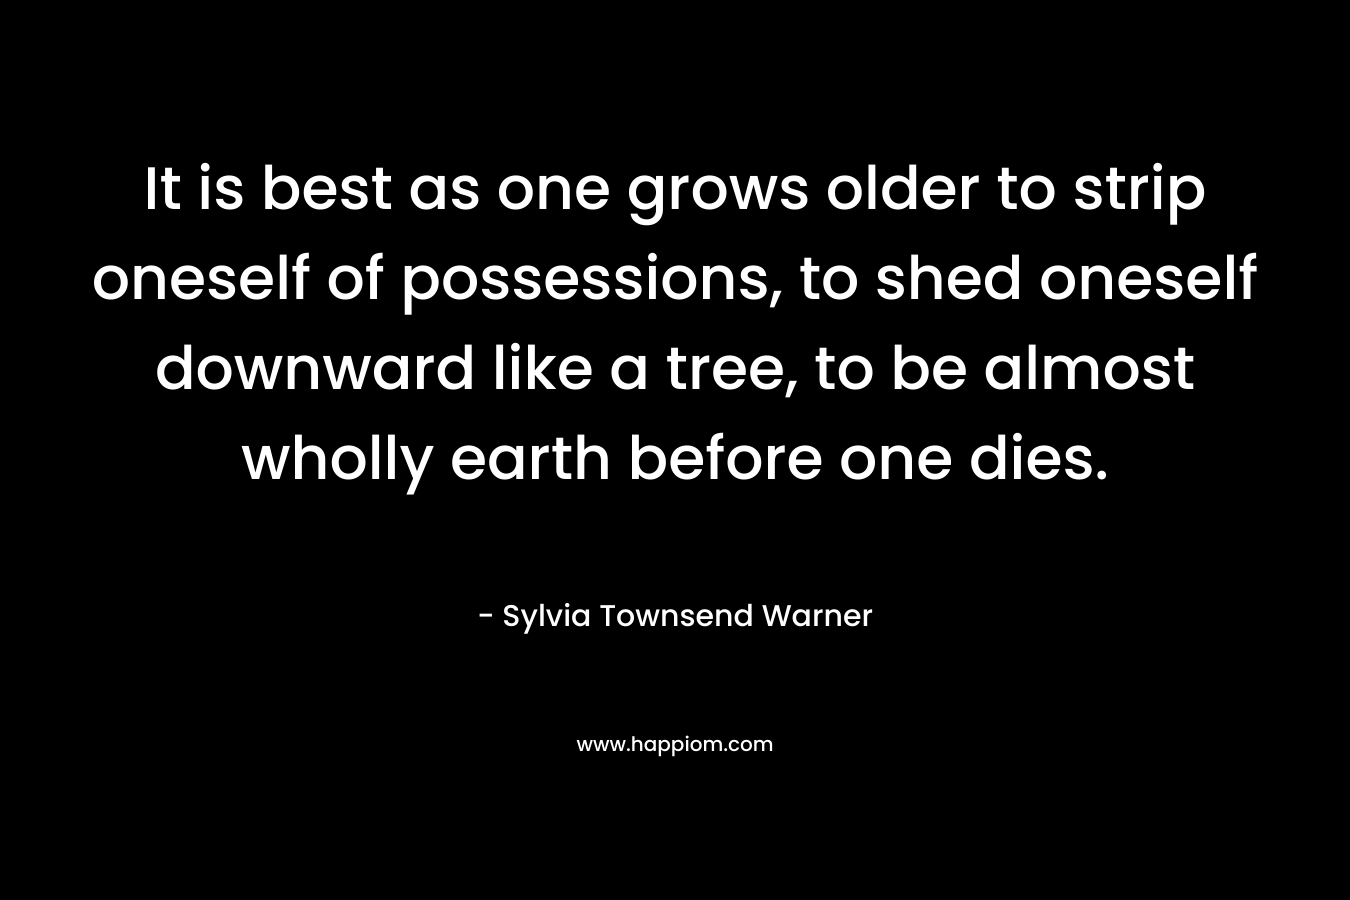 It is best as one grows older to strip oneself of possessions, to shed oneself downward like a tree, to be almost wholly earth before one dies.